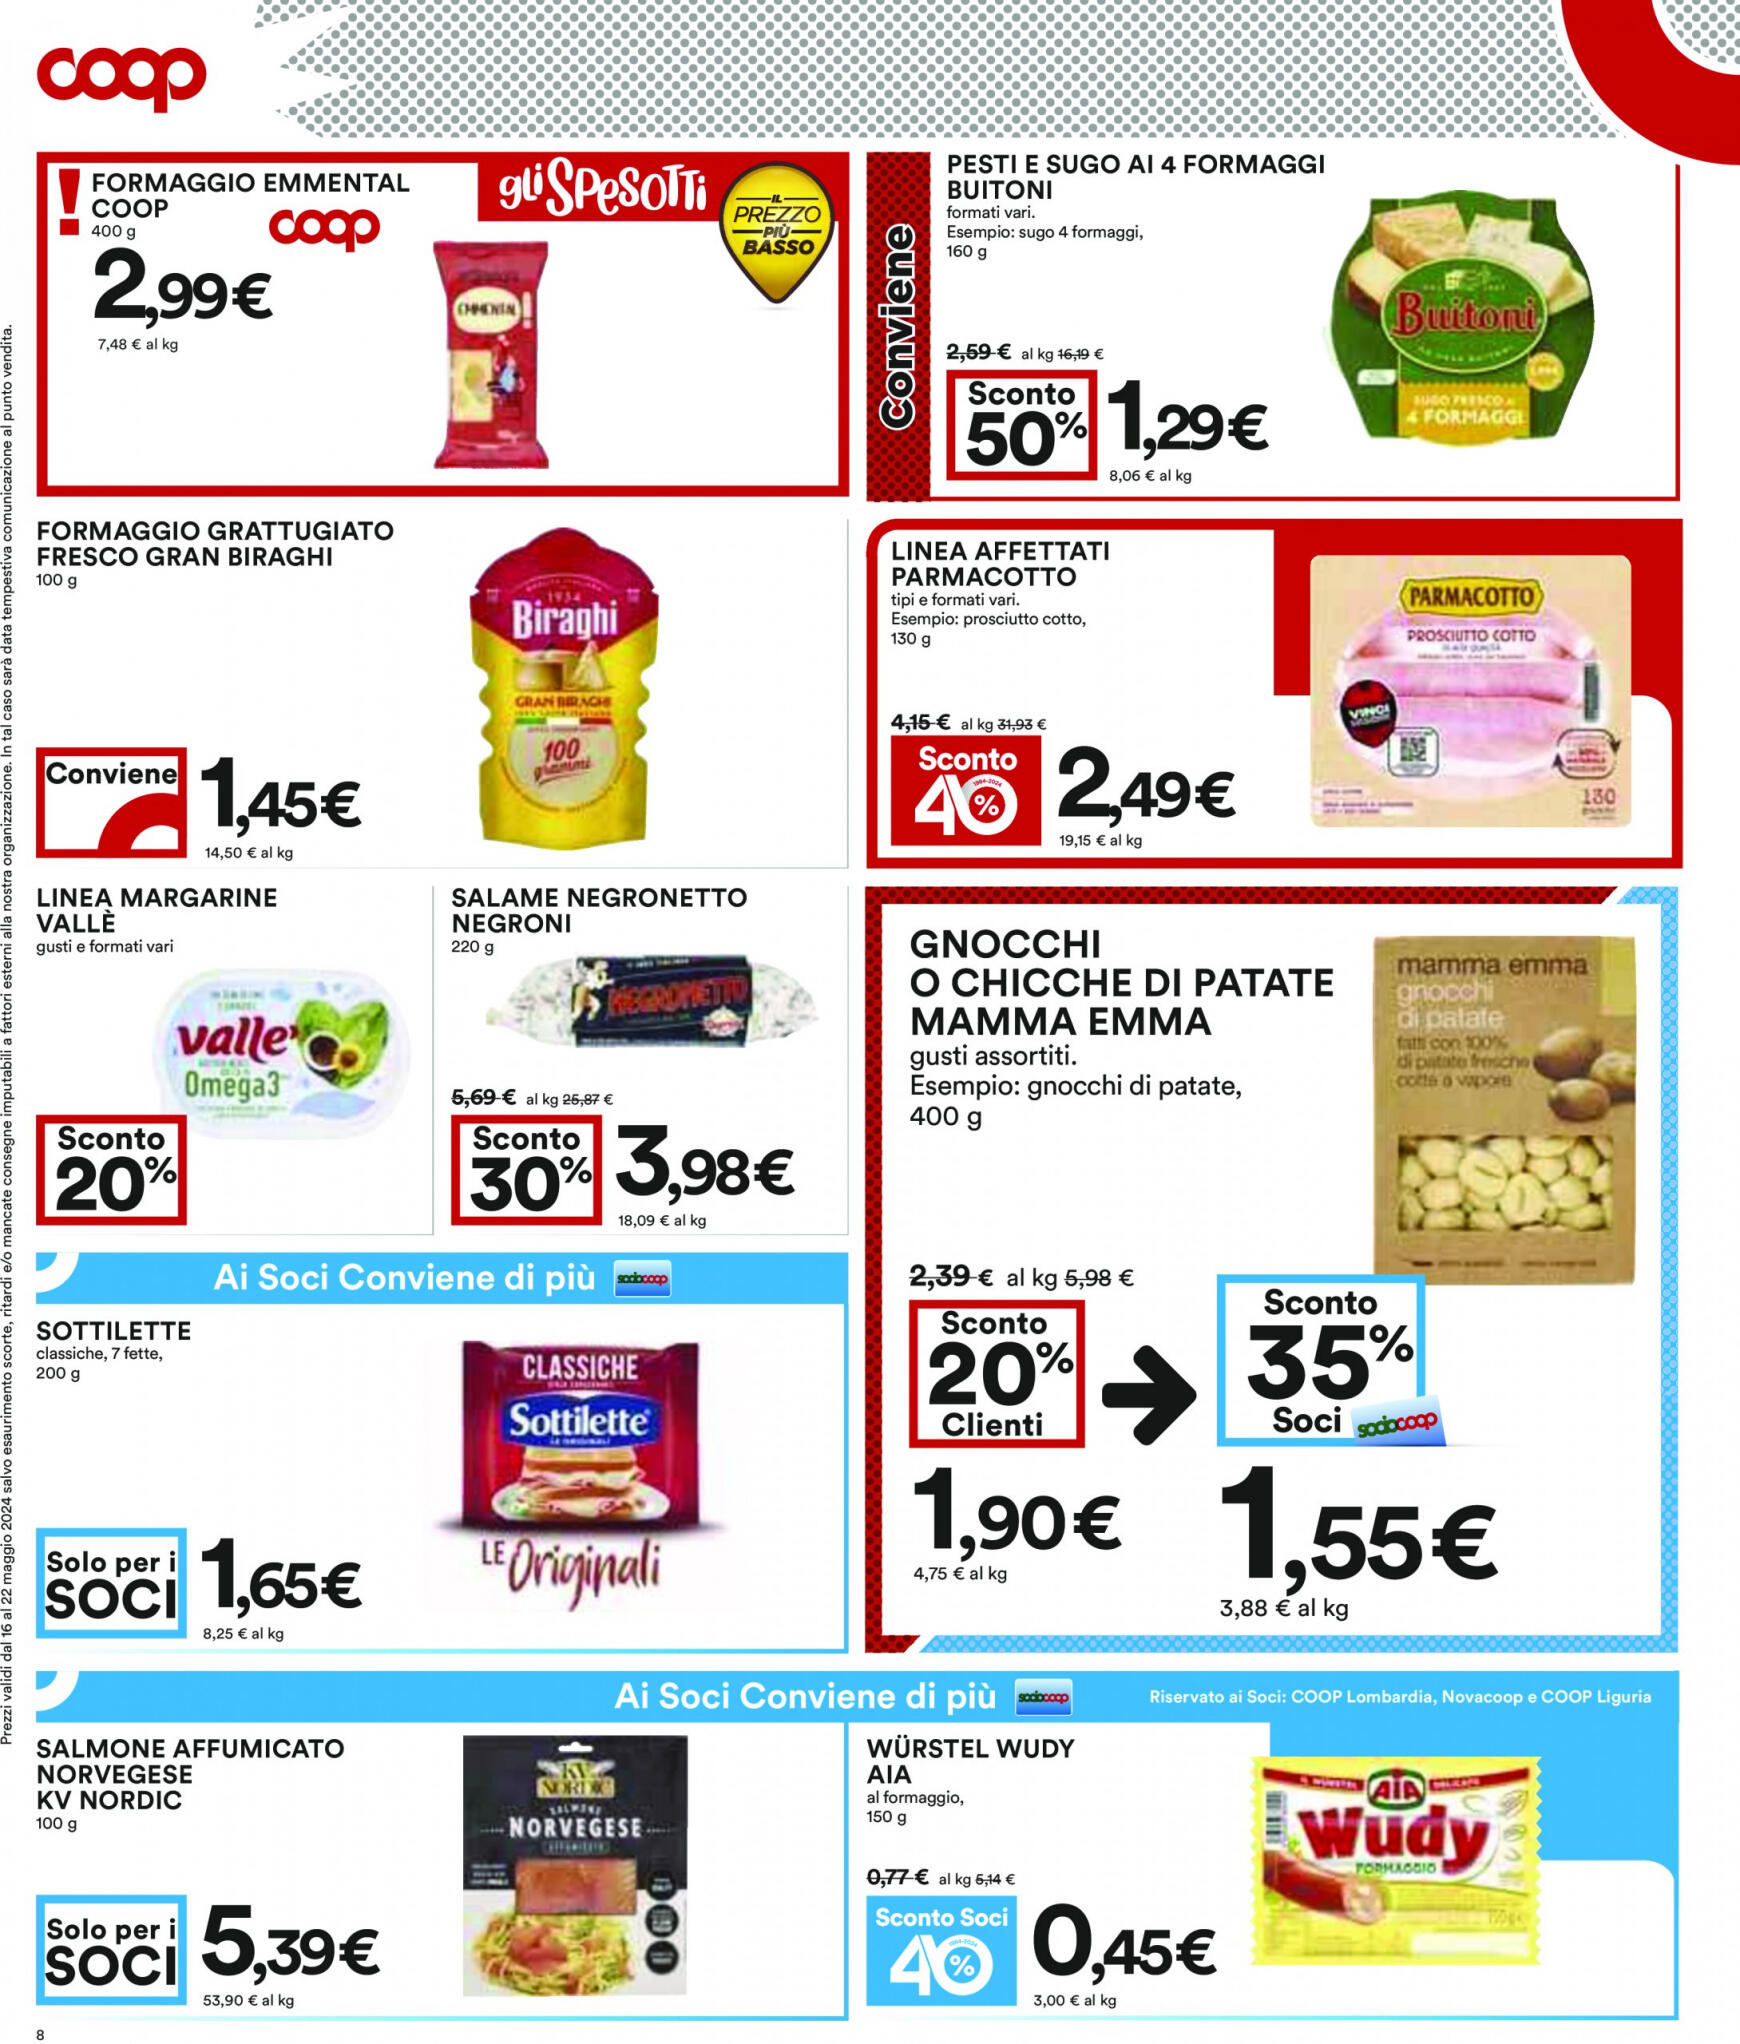 coop - Nuovo volantino Coop 16.05. - 22.05. - page: 8